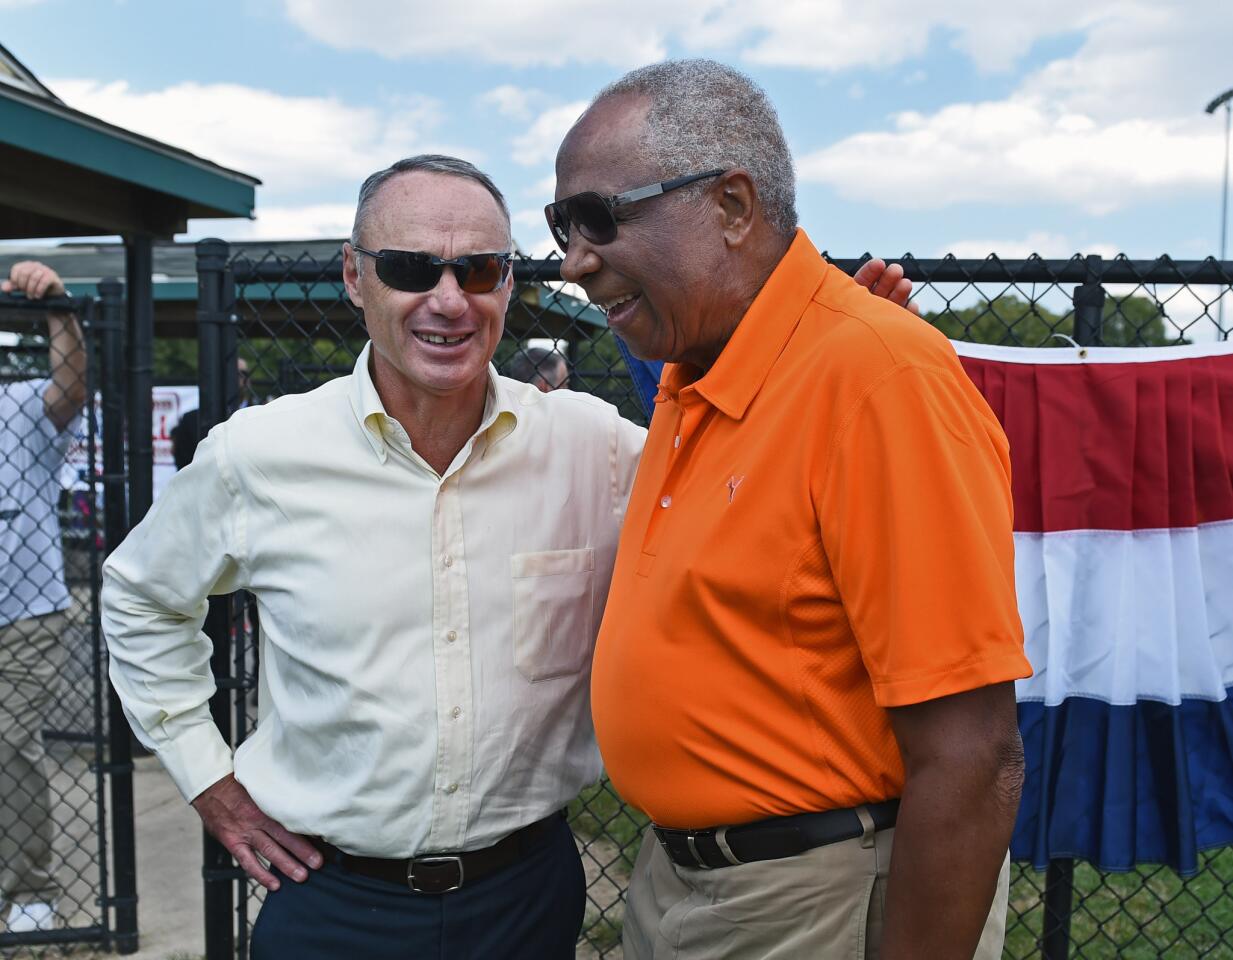 Hall of Famer and former Orioles star Frank Robinson, right, shares a laugh with MLB commissioner Rob Manfred before the Play Ball event at Carroll Park on Aug. 26, 2015.